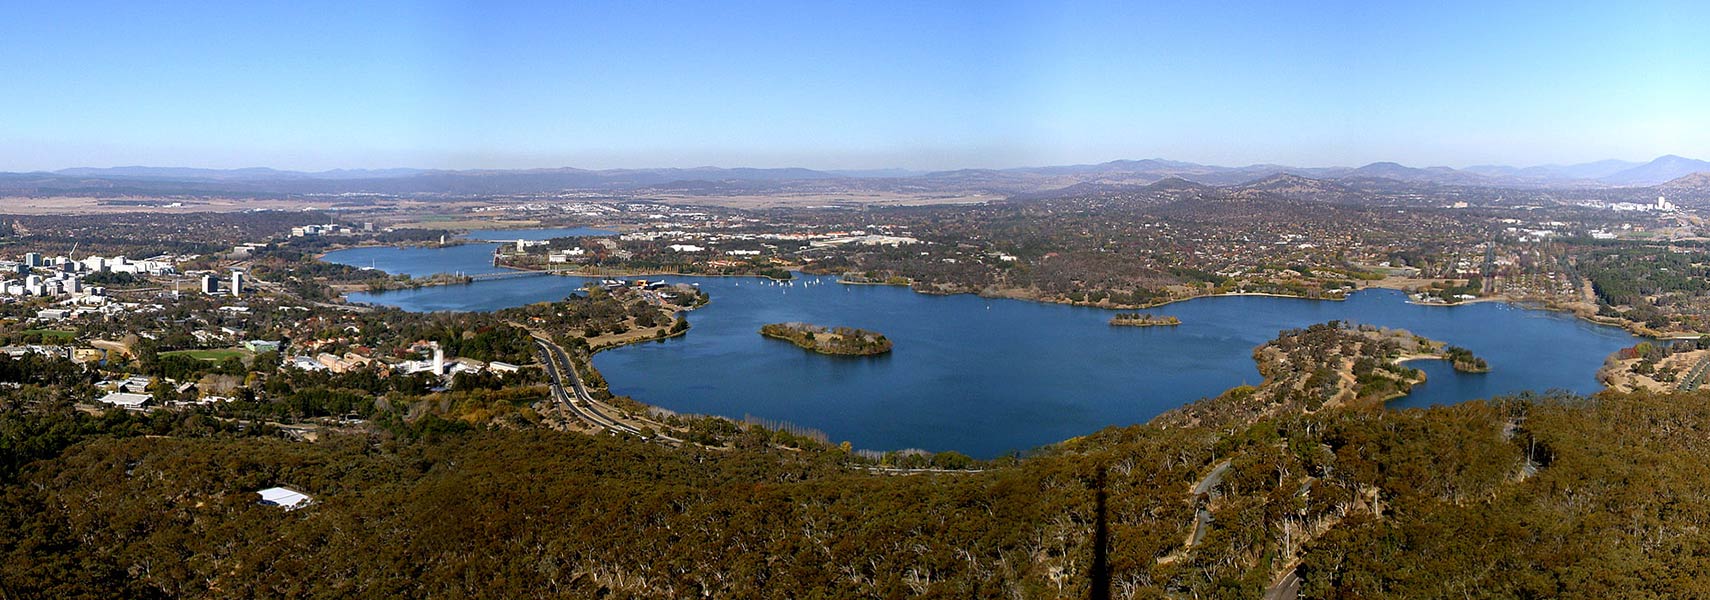 View of Canberra, Australia, from the Telstra Tower on Black Mountain